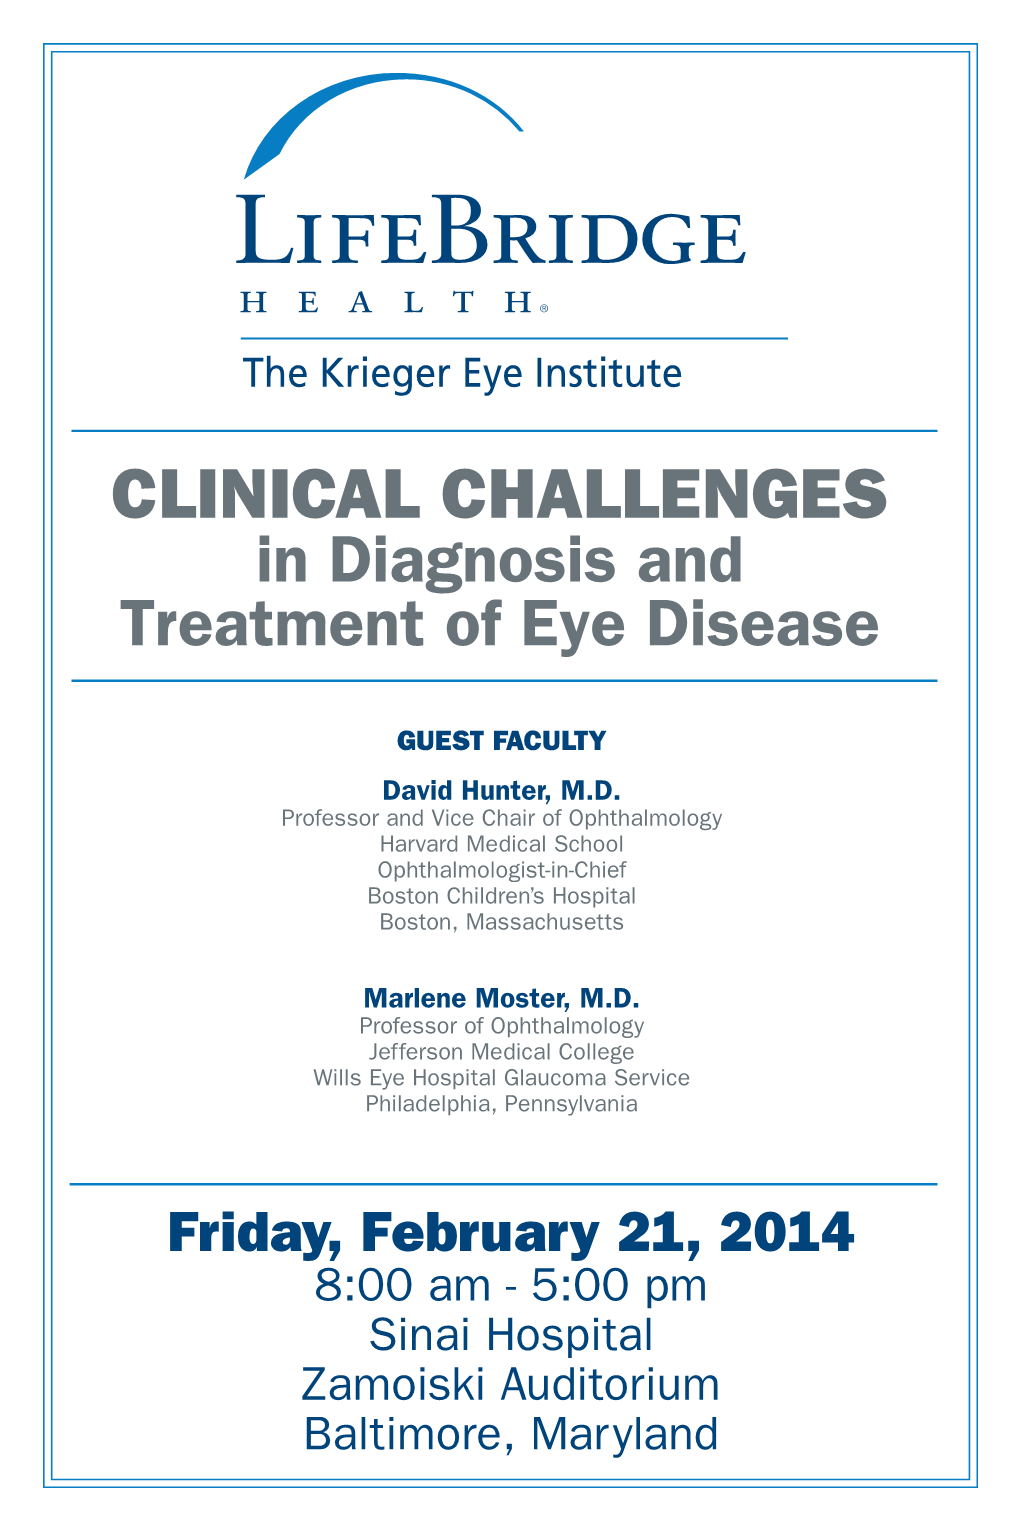 CLINICAL CHALLENGES in Diagnosis and Treatment of Eye Disease